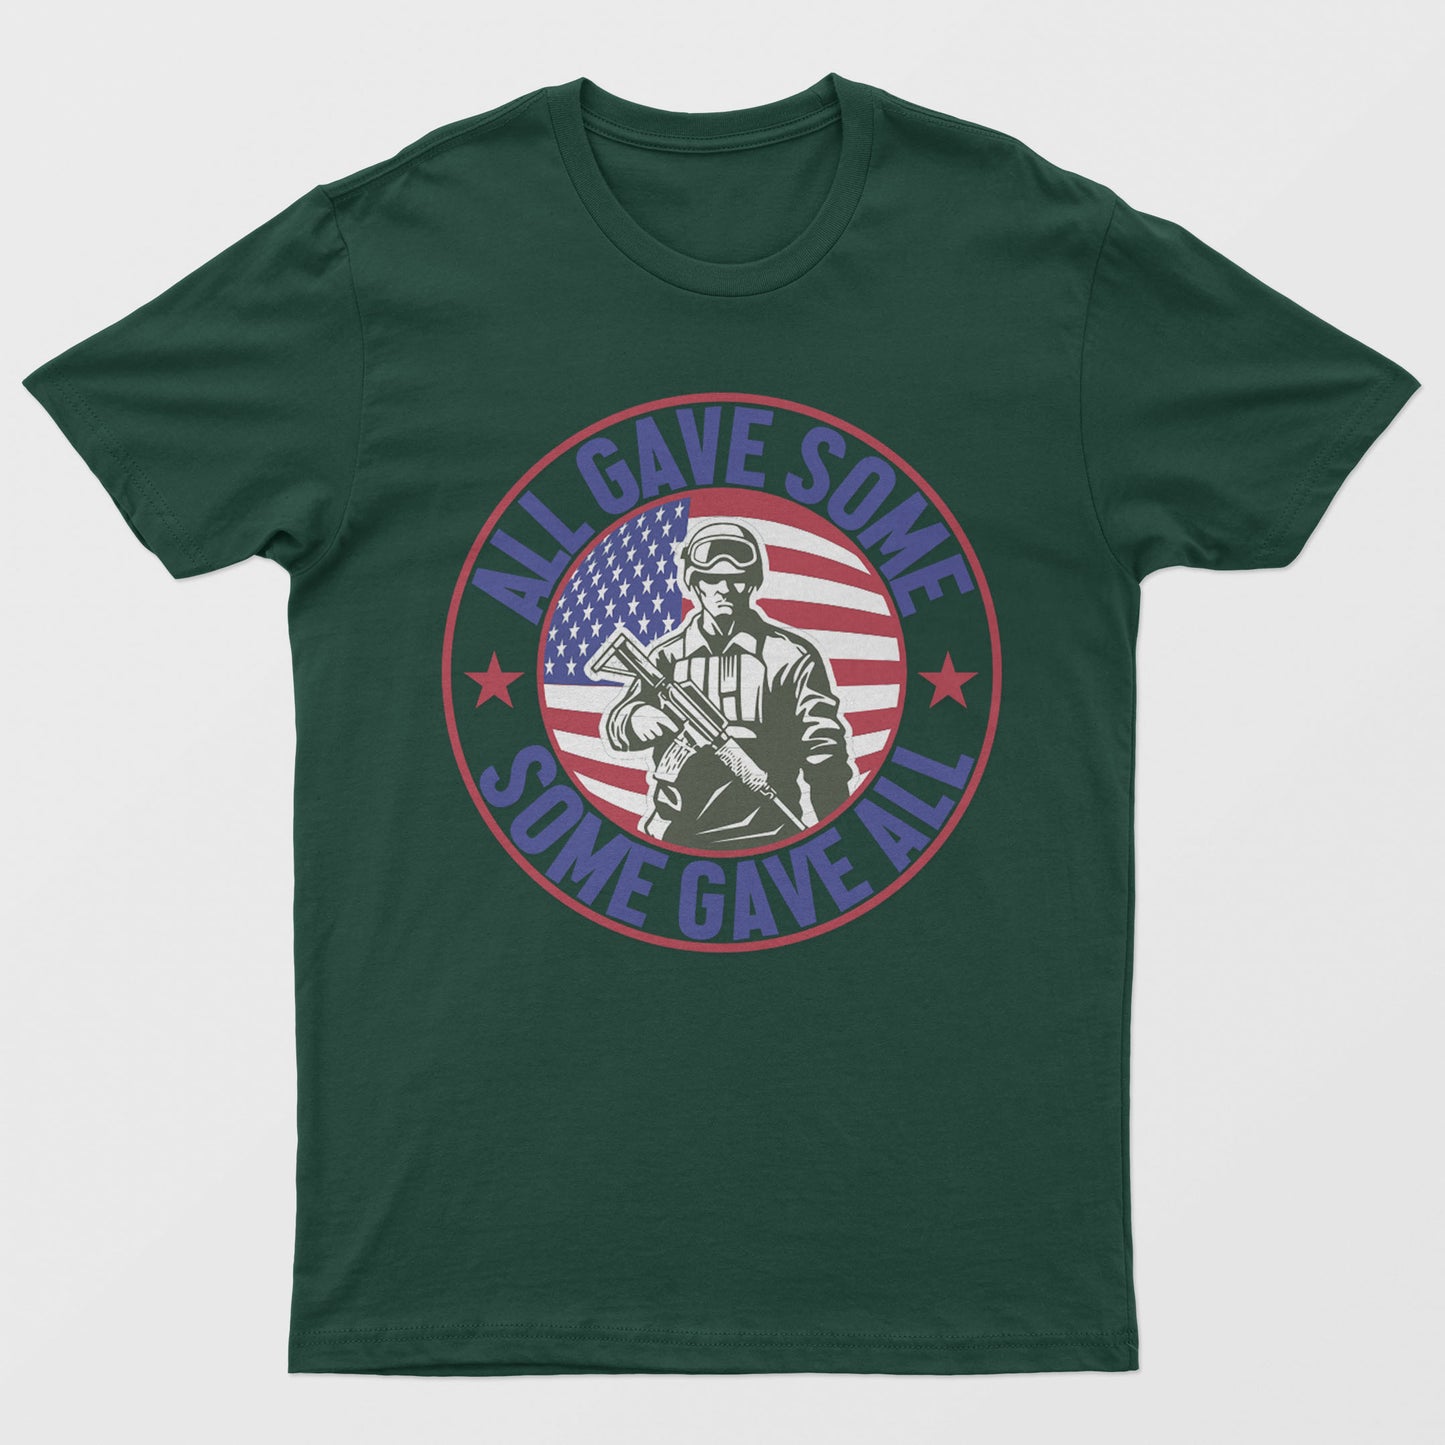 American Soldier Tribute T-Shirt: S-XXXL, Various Colors, Free Shipping